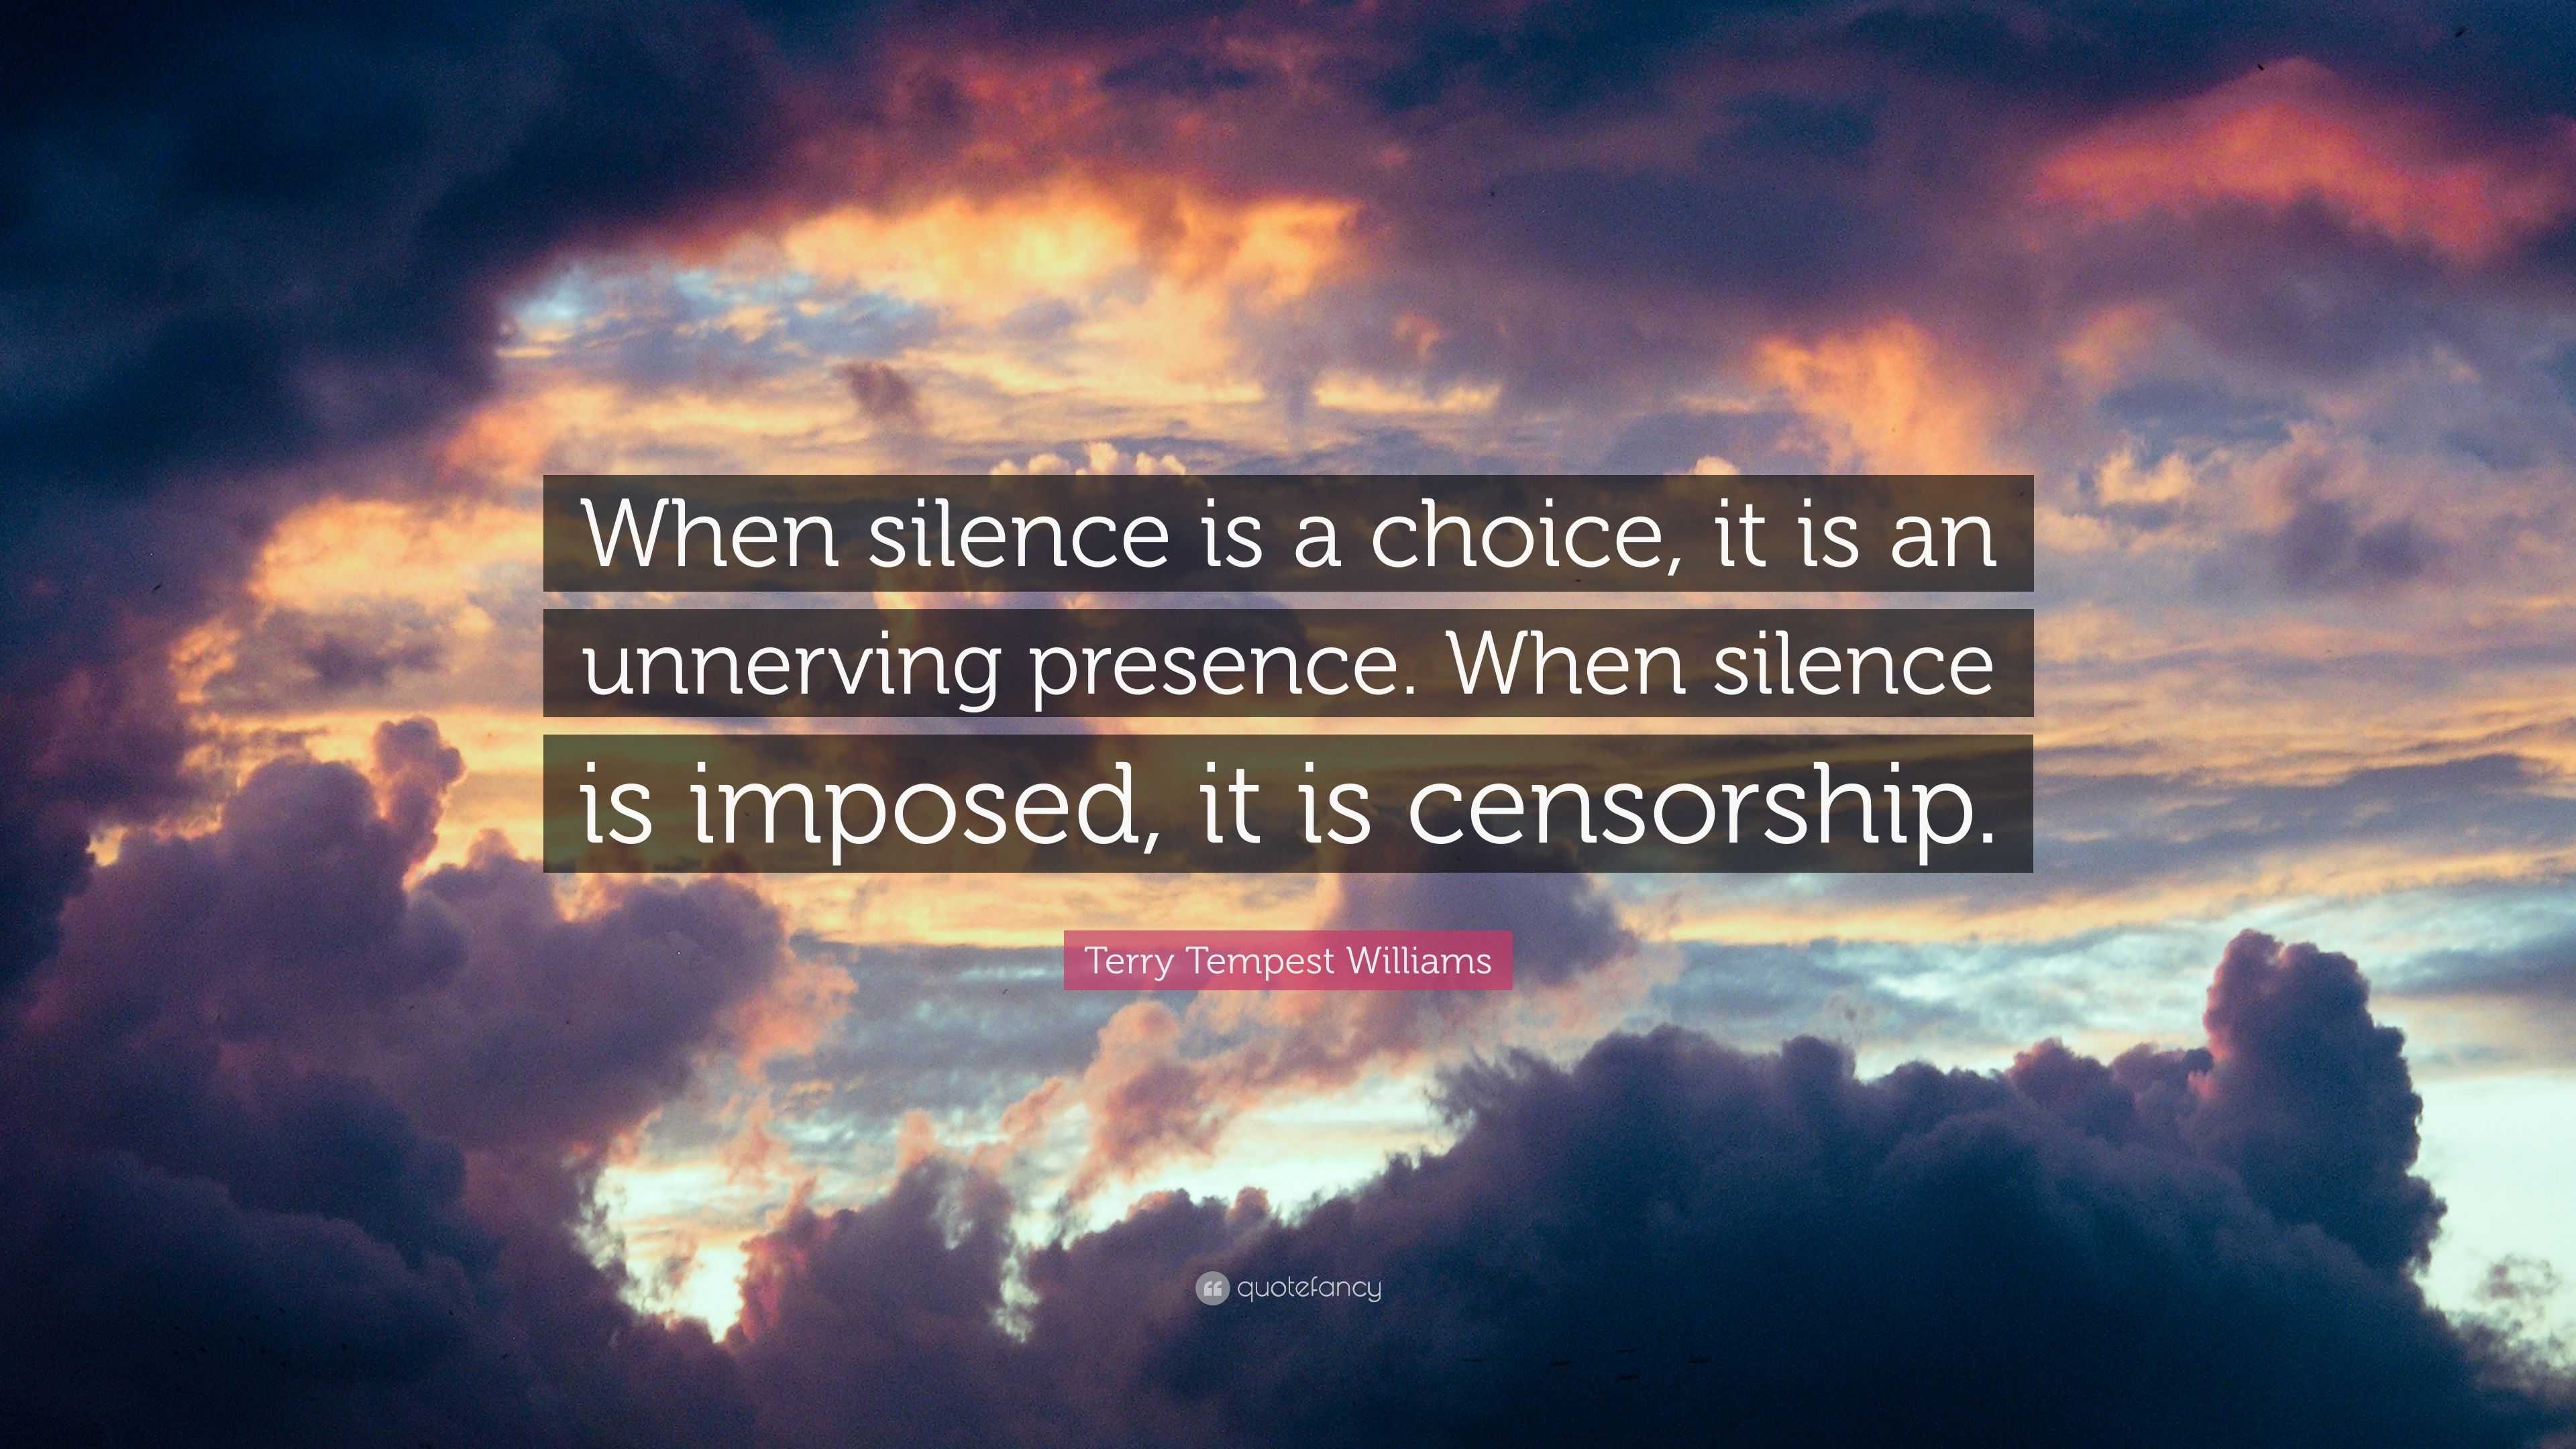 Terry Tempest Williams Quote When Silence Is A Choice It Is An Unnerving Presence When Silence Is Imposed It Is Censorship 7 Wallpapers Quotefancy